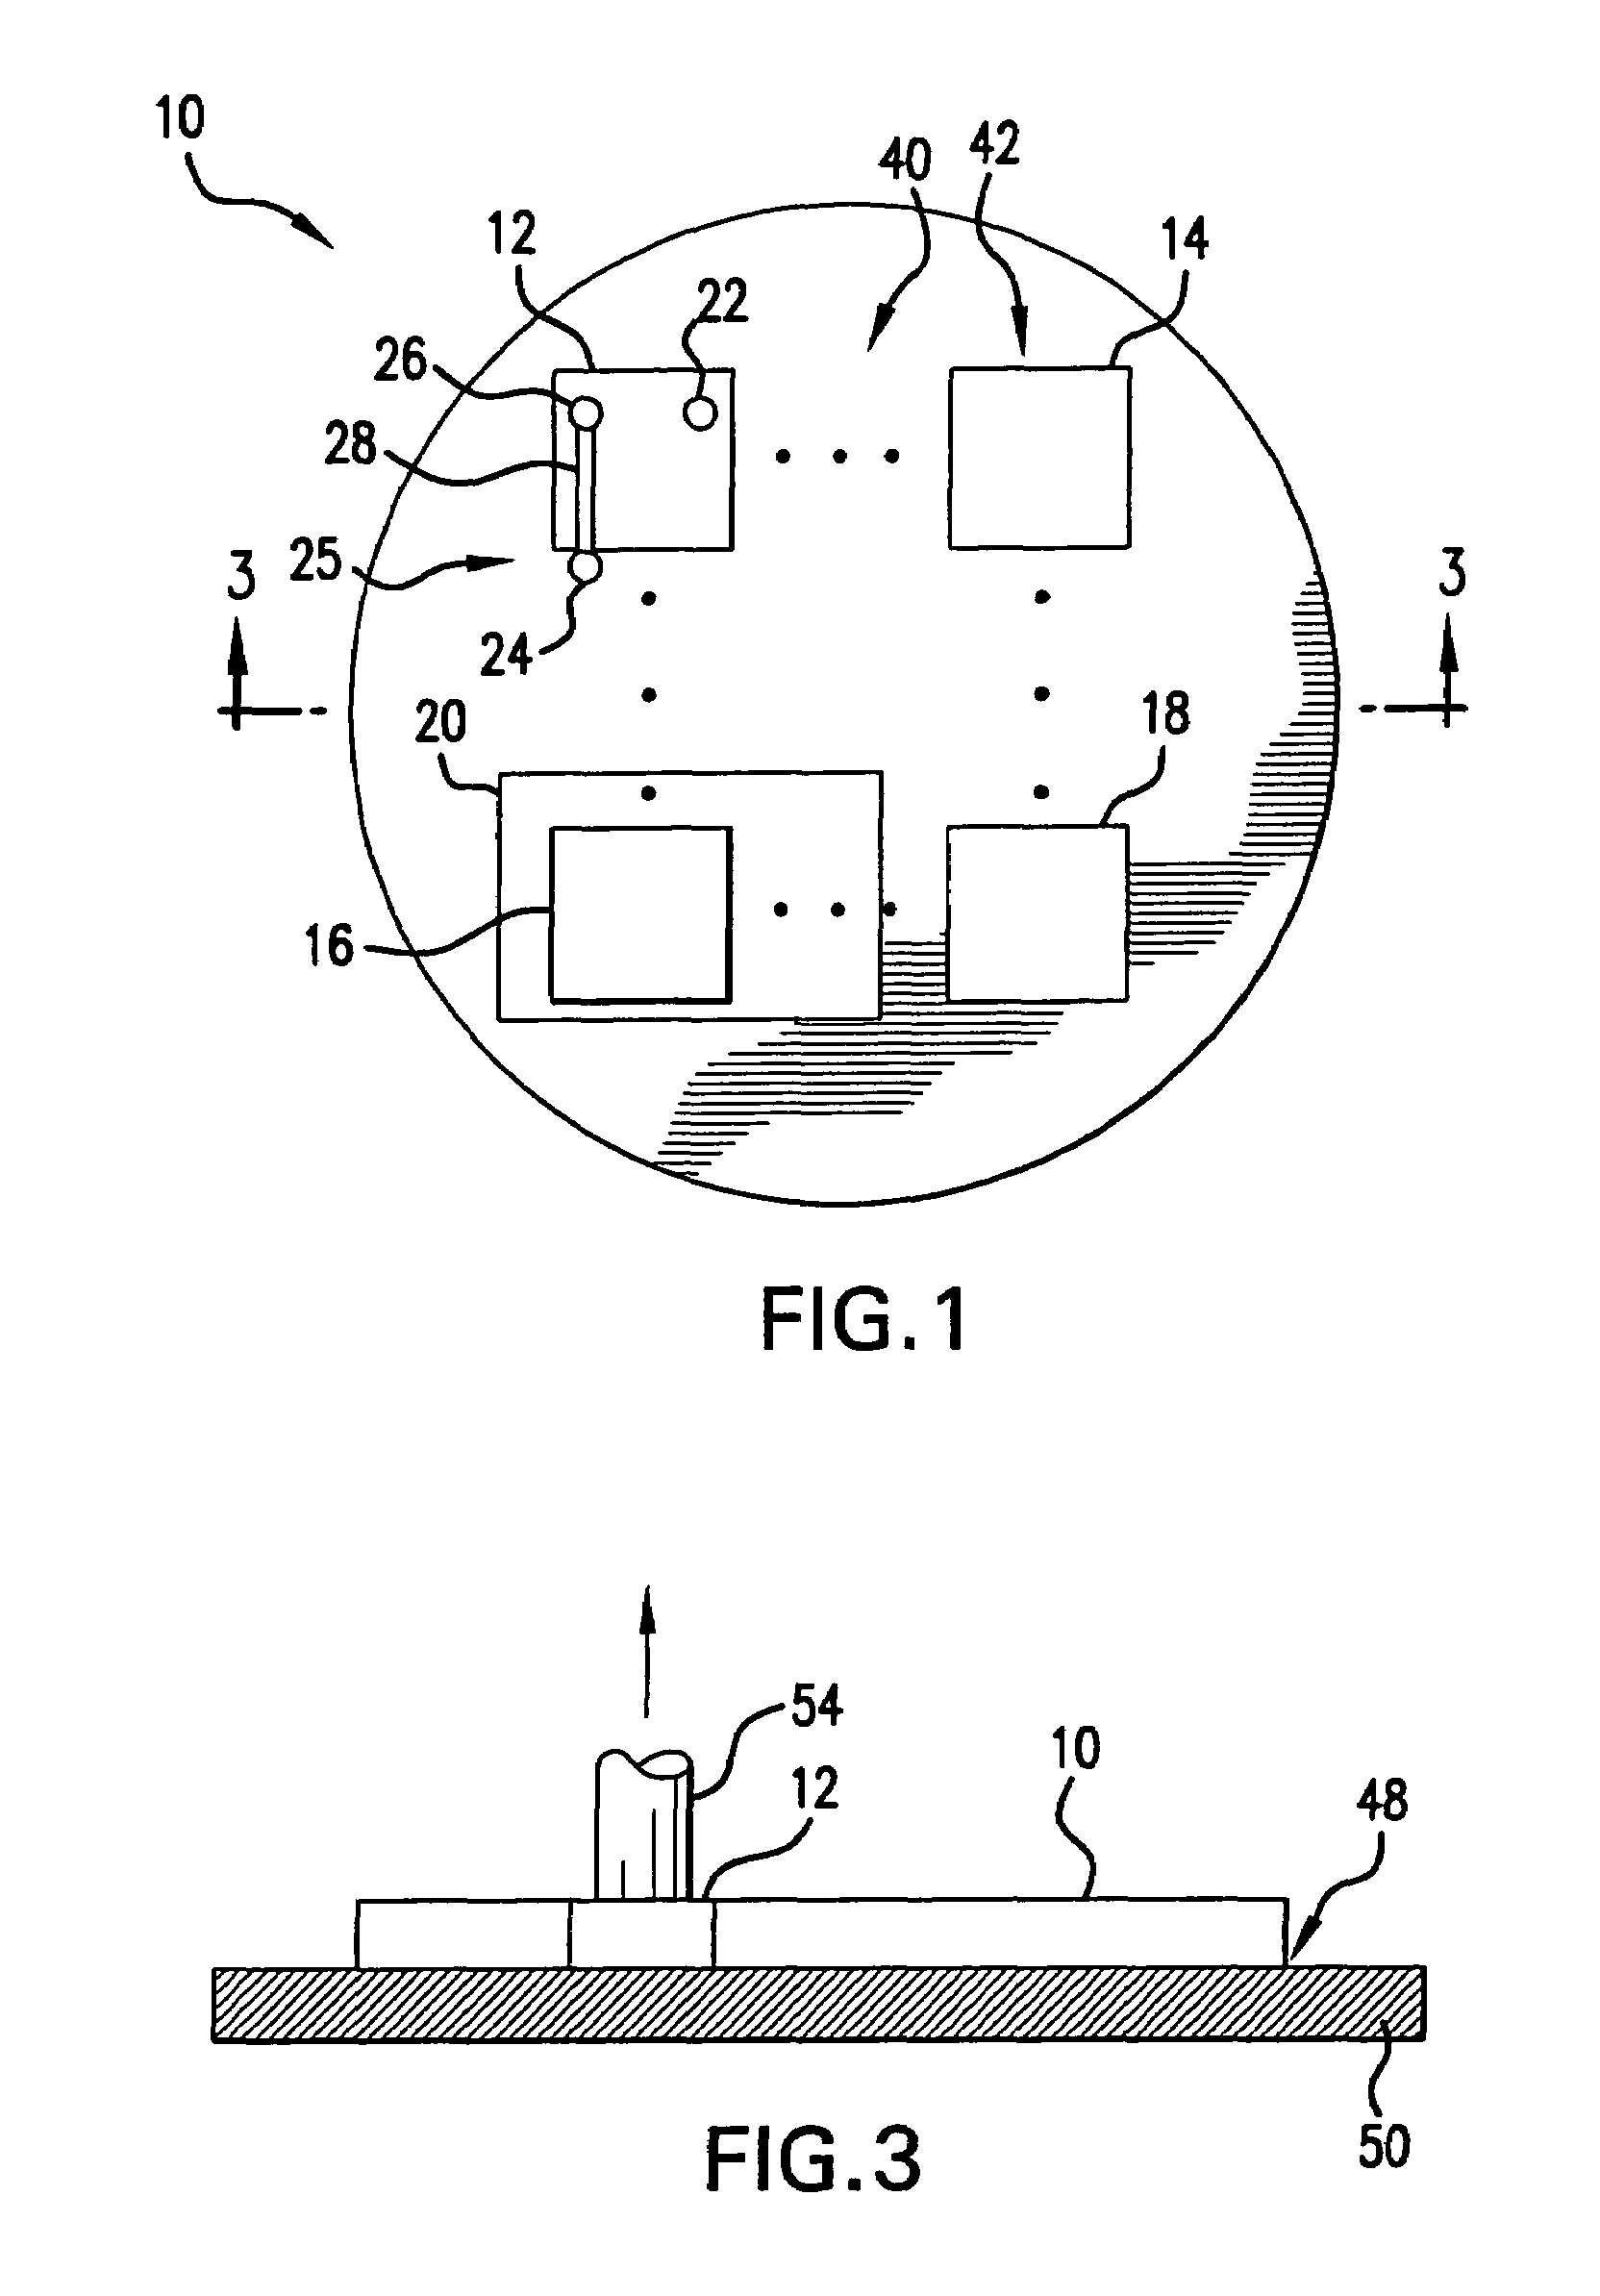 Deposition pattern for eliminating backside metal peeling during die separation in semiconductor device fabrication